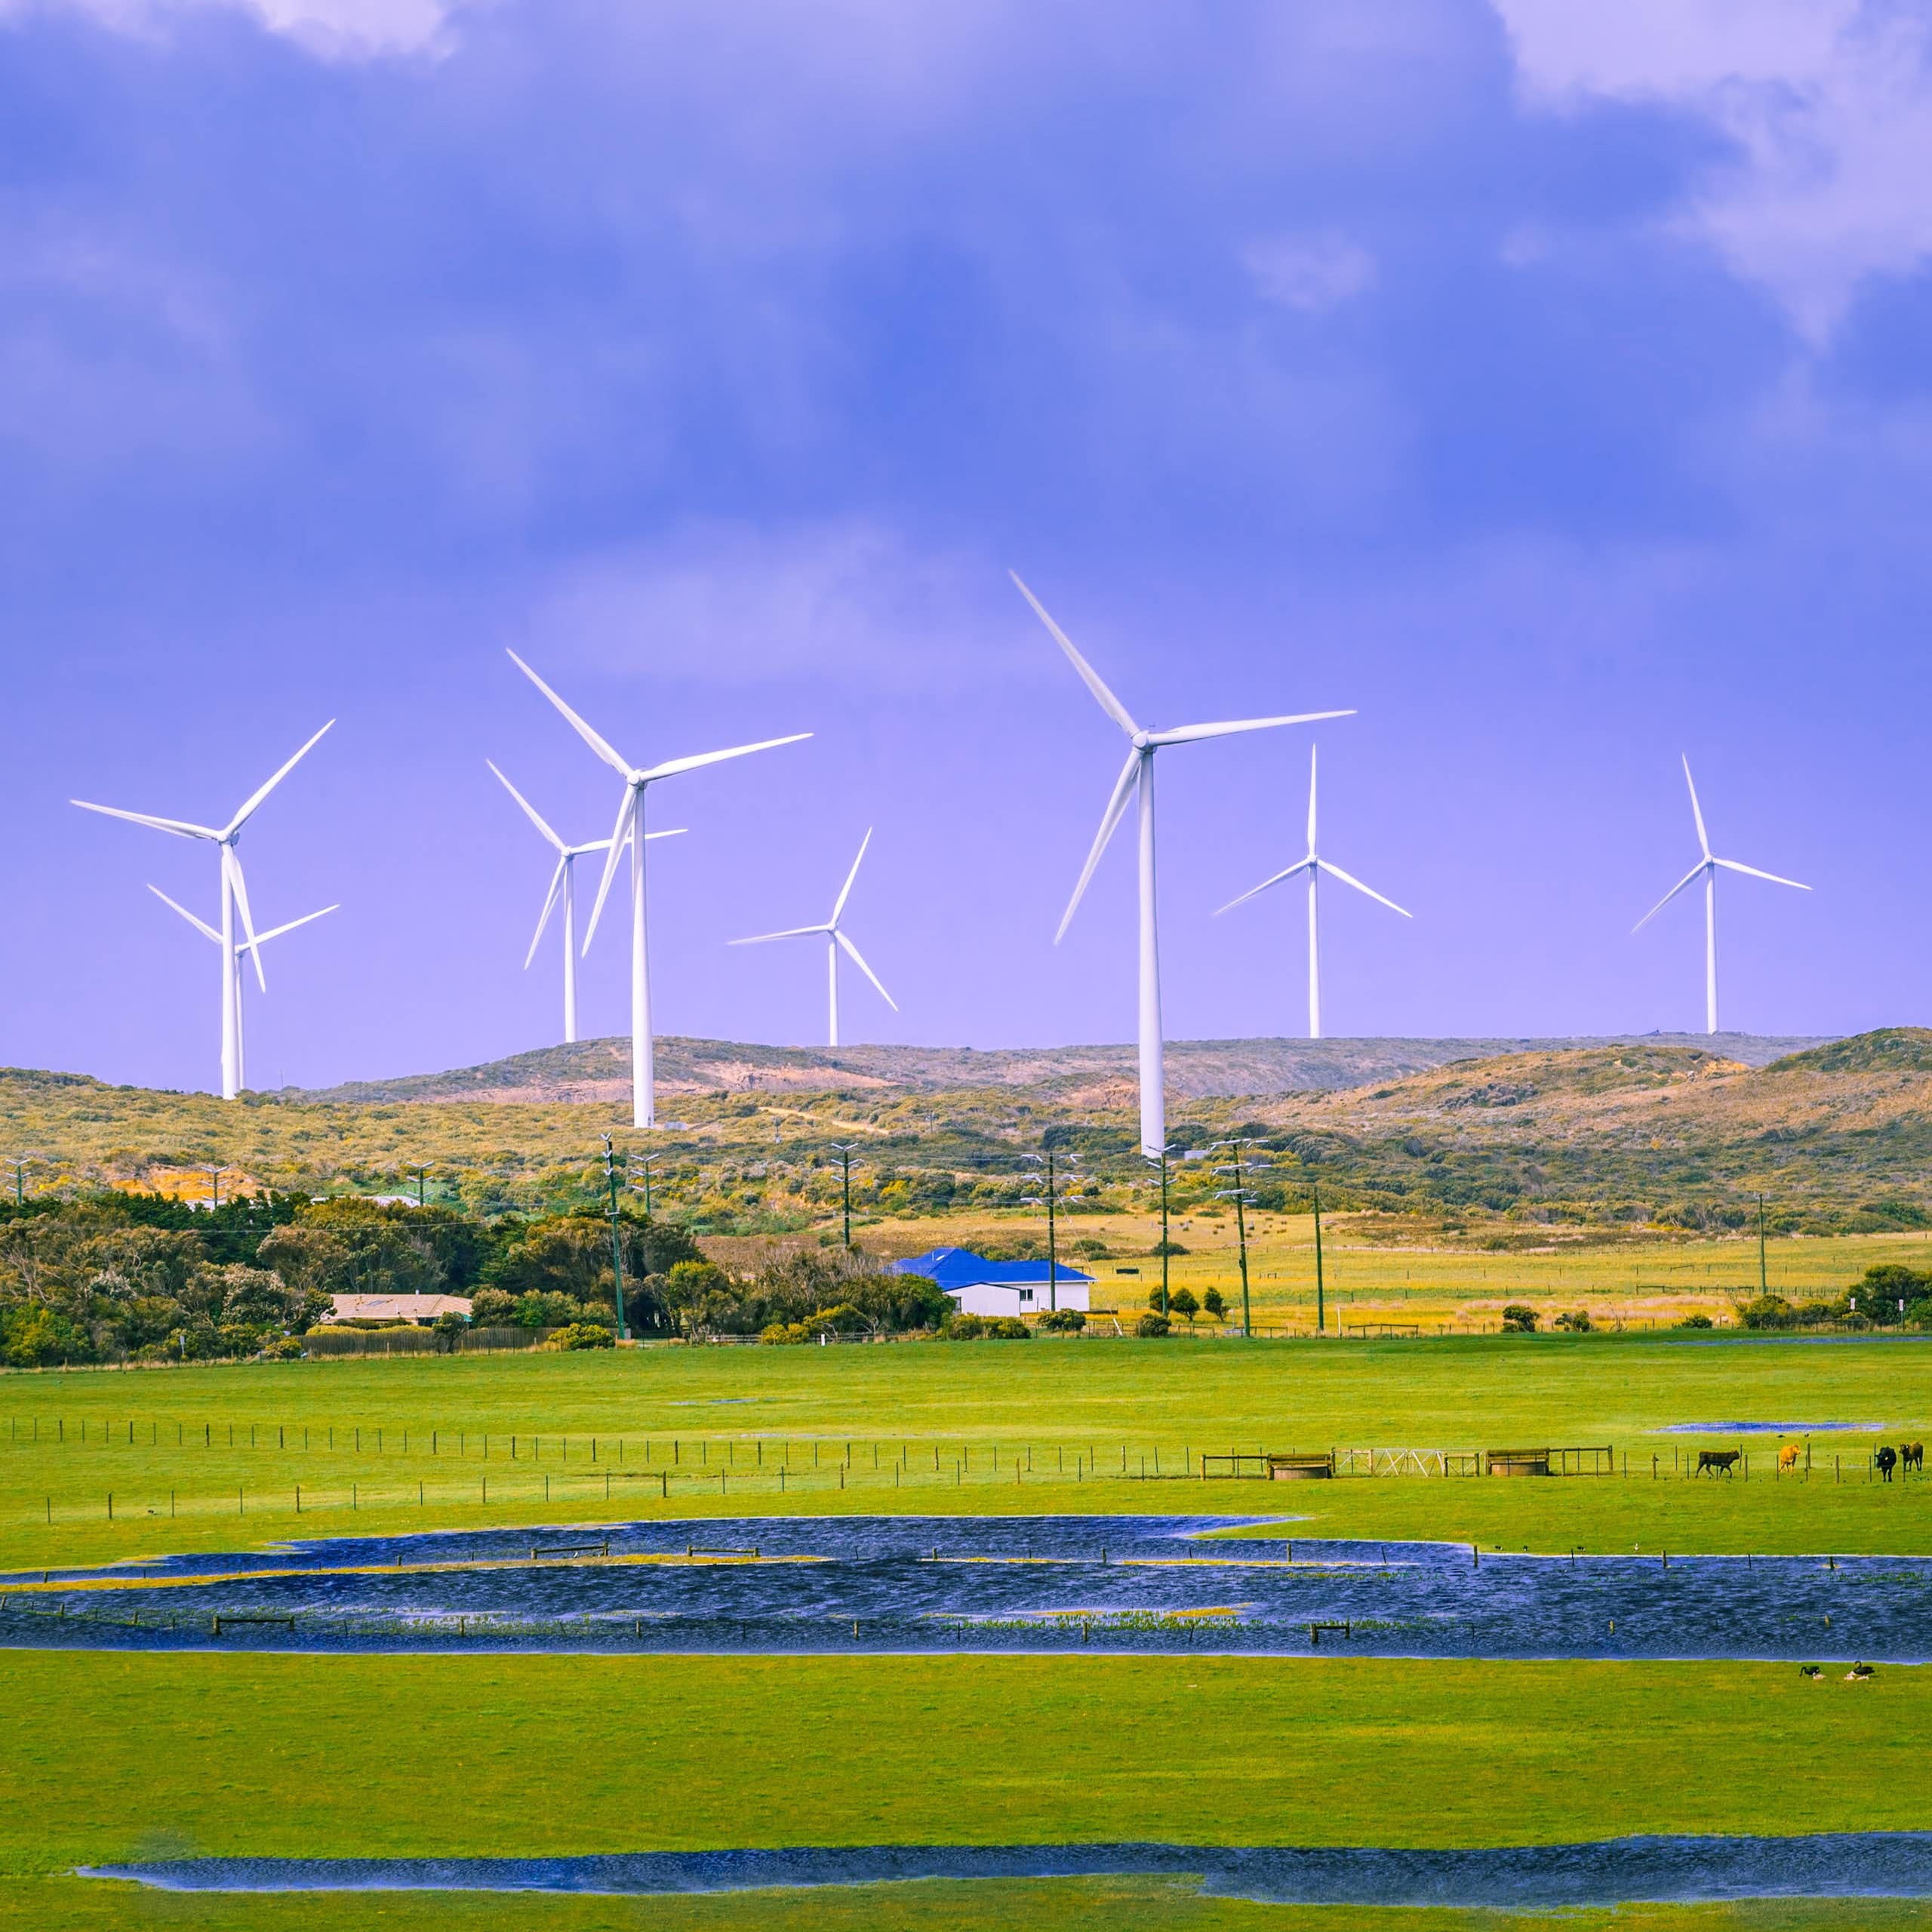 Rural area in Australia with pastures and wind turbines.